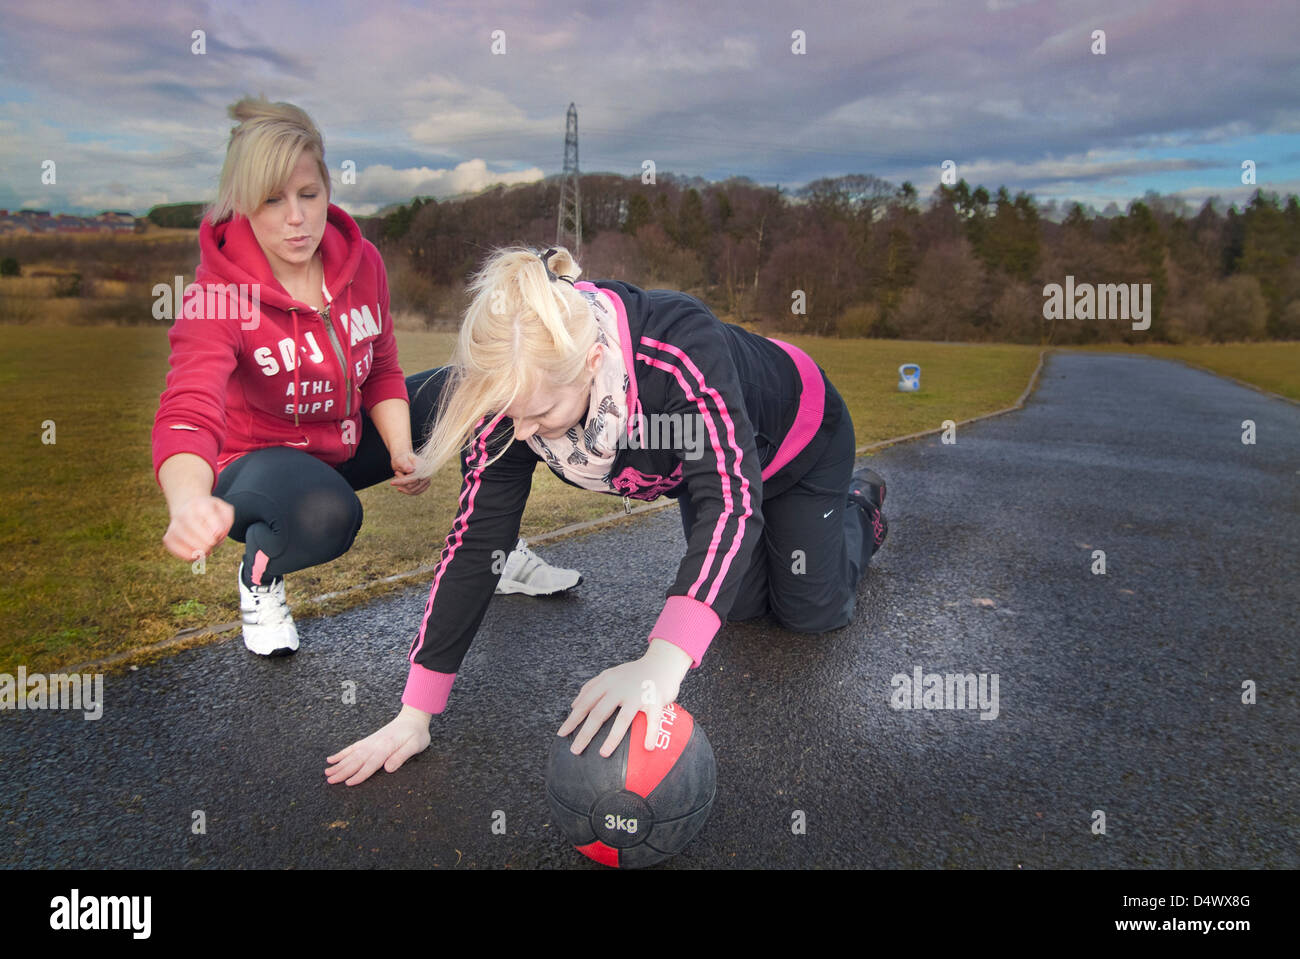 Personal Trainer helping a client Stock Photo